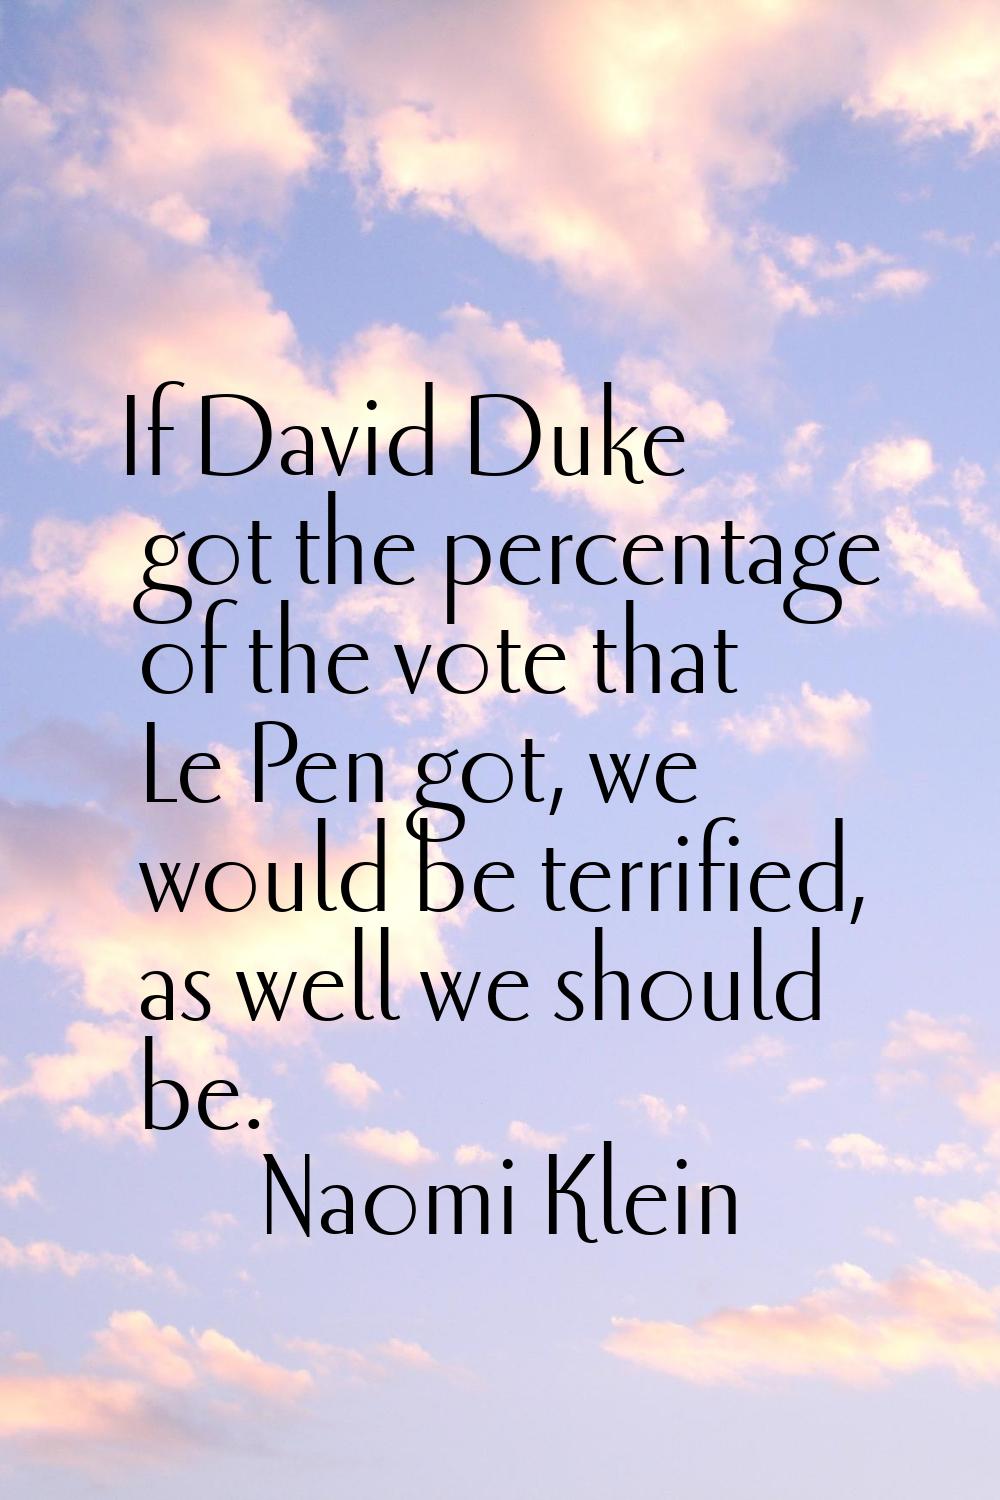 If David Duke got the percentage of the vote that Le Pen got, we would be terrified, as well we sho